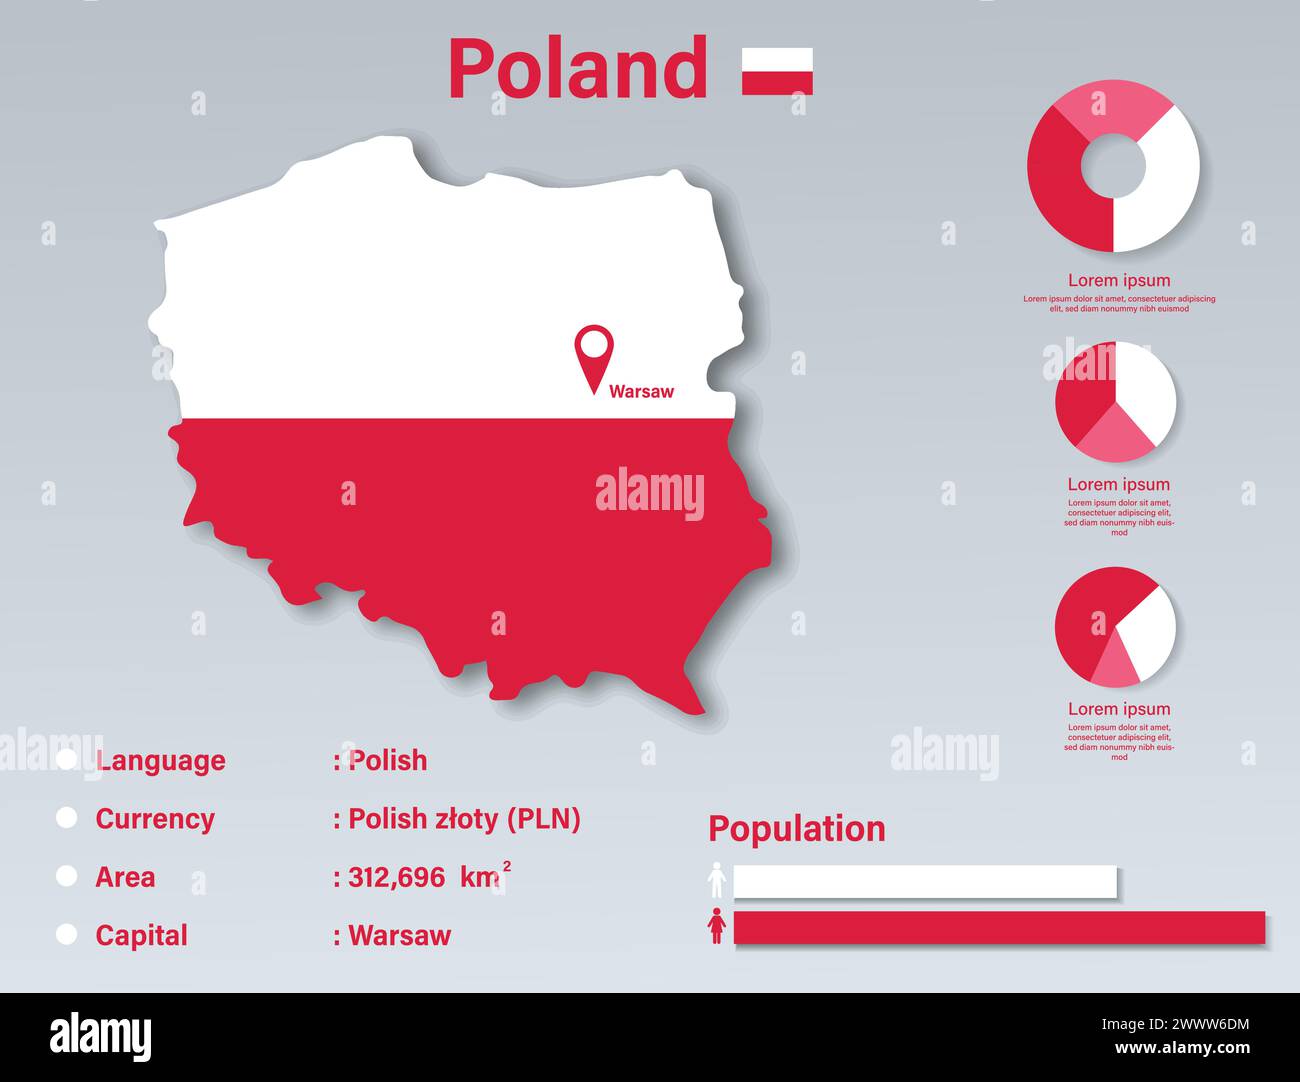 Polonia Infographic Vector Illustration, Poland Statistical Data Element, Poland Information Board with Flag Map, Poland Map Flag Flat Design Illustrazione Vettoriale